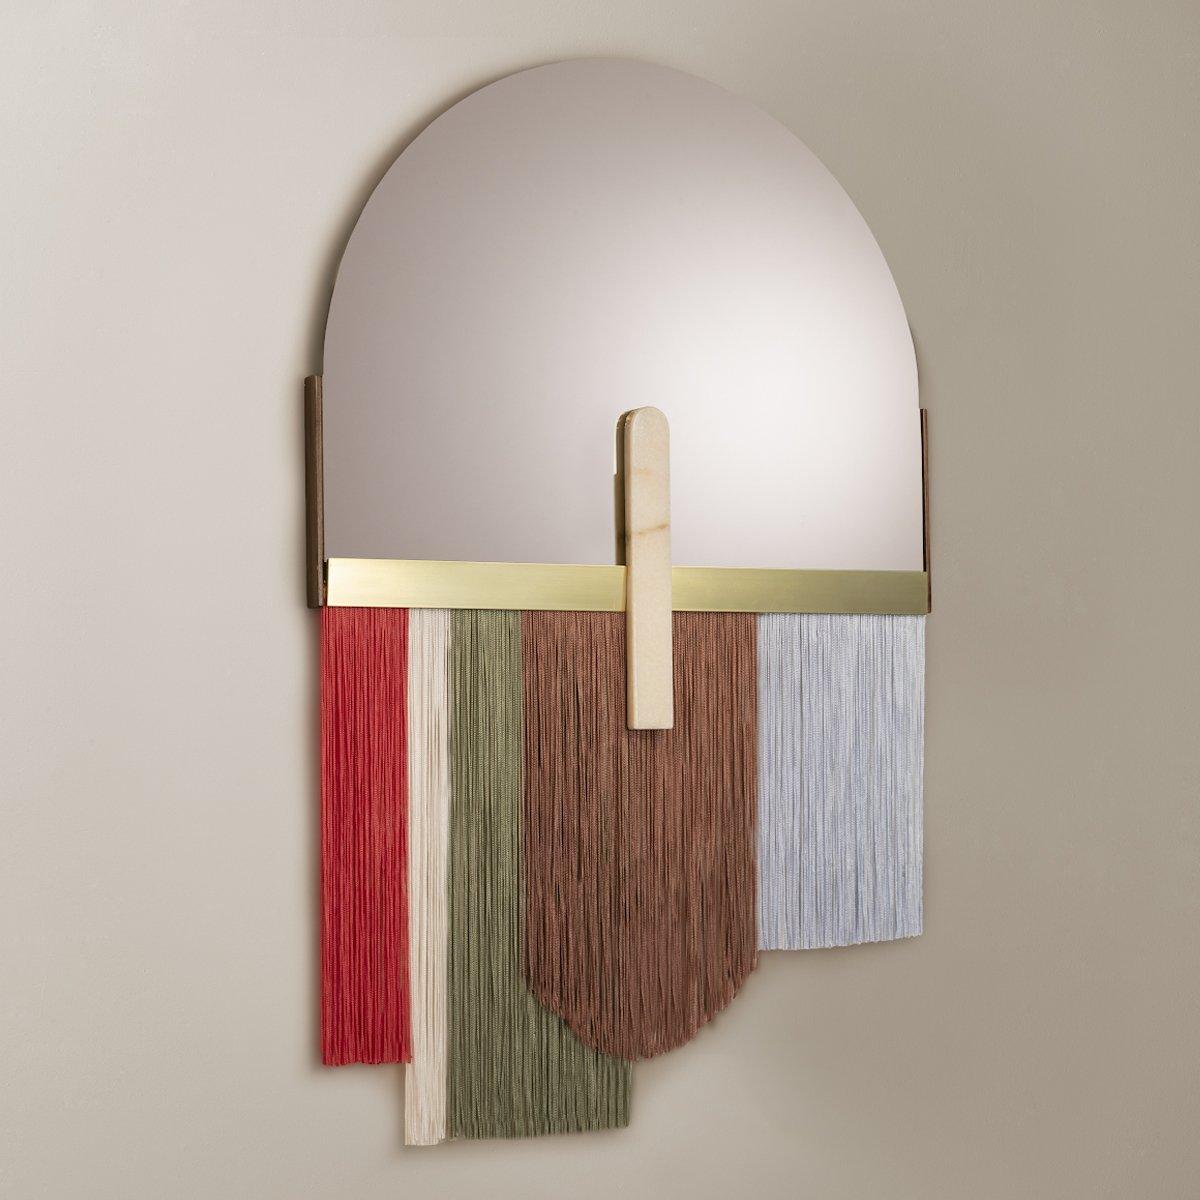 Ensemble of Three Colorful Wall Mirrors by Dooq For Sale 6